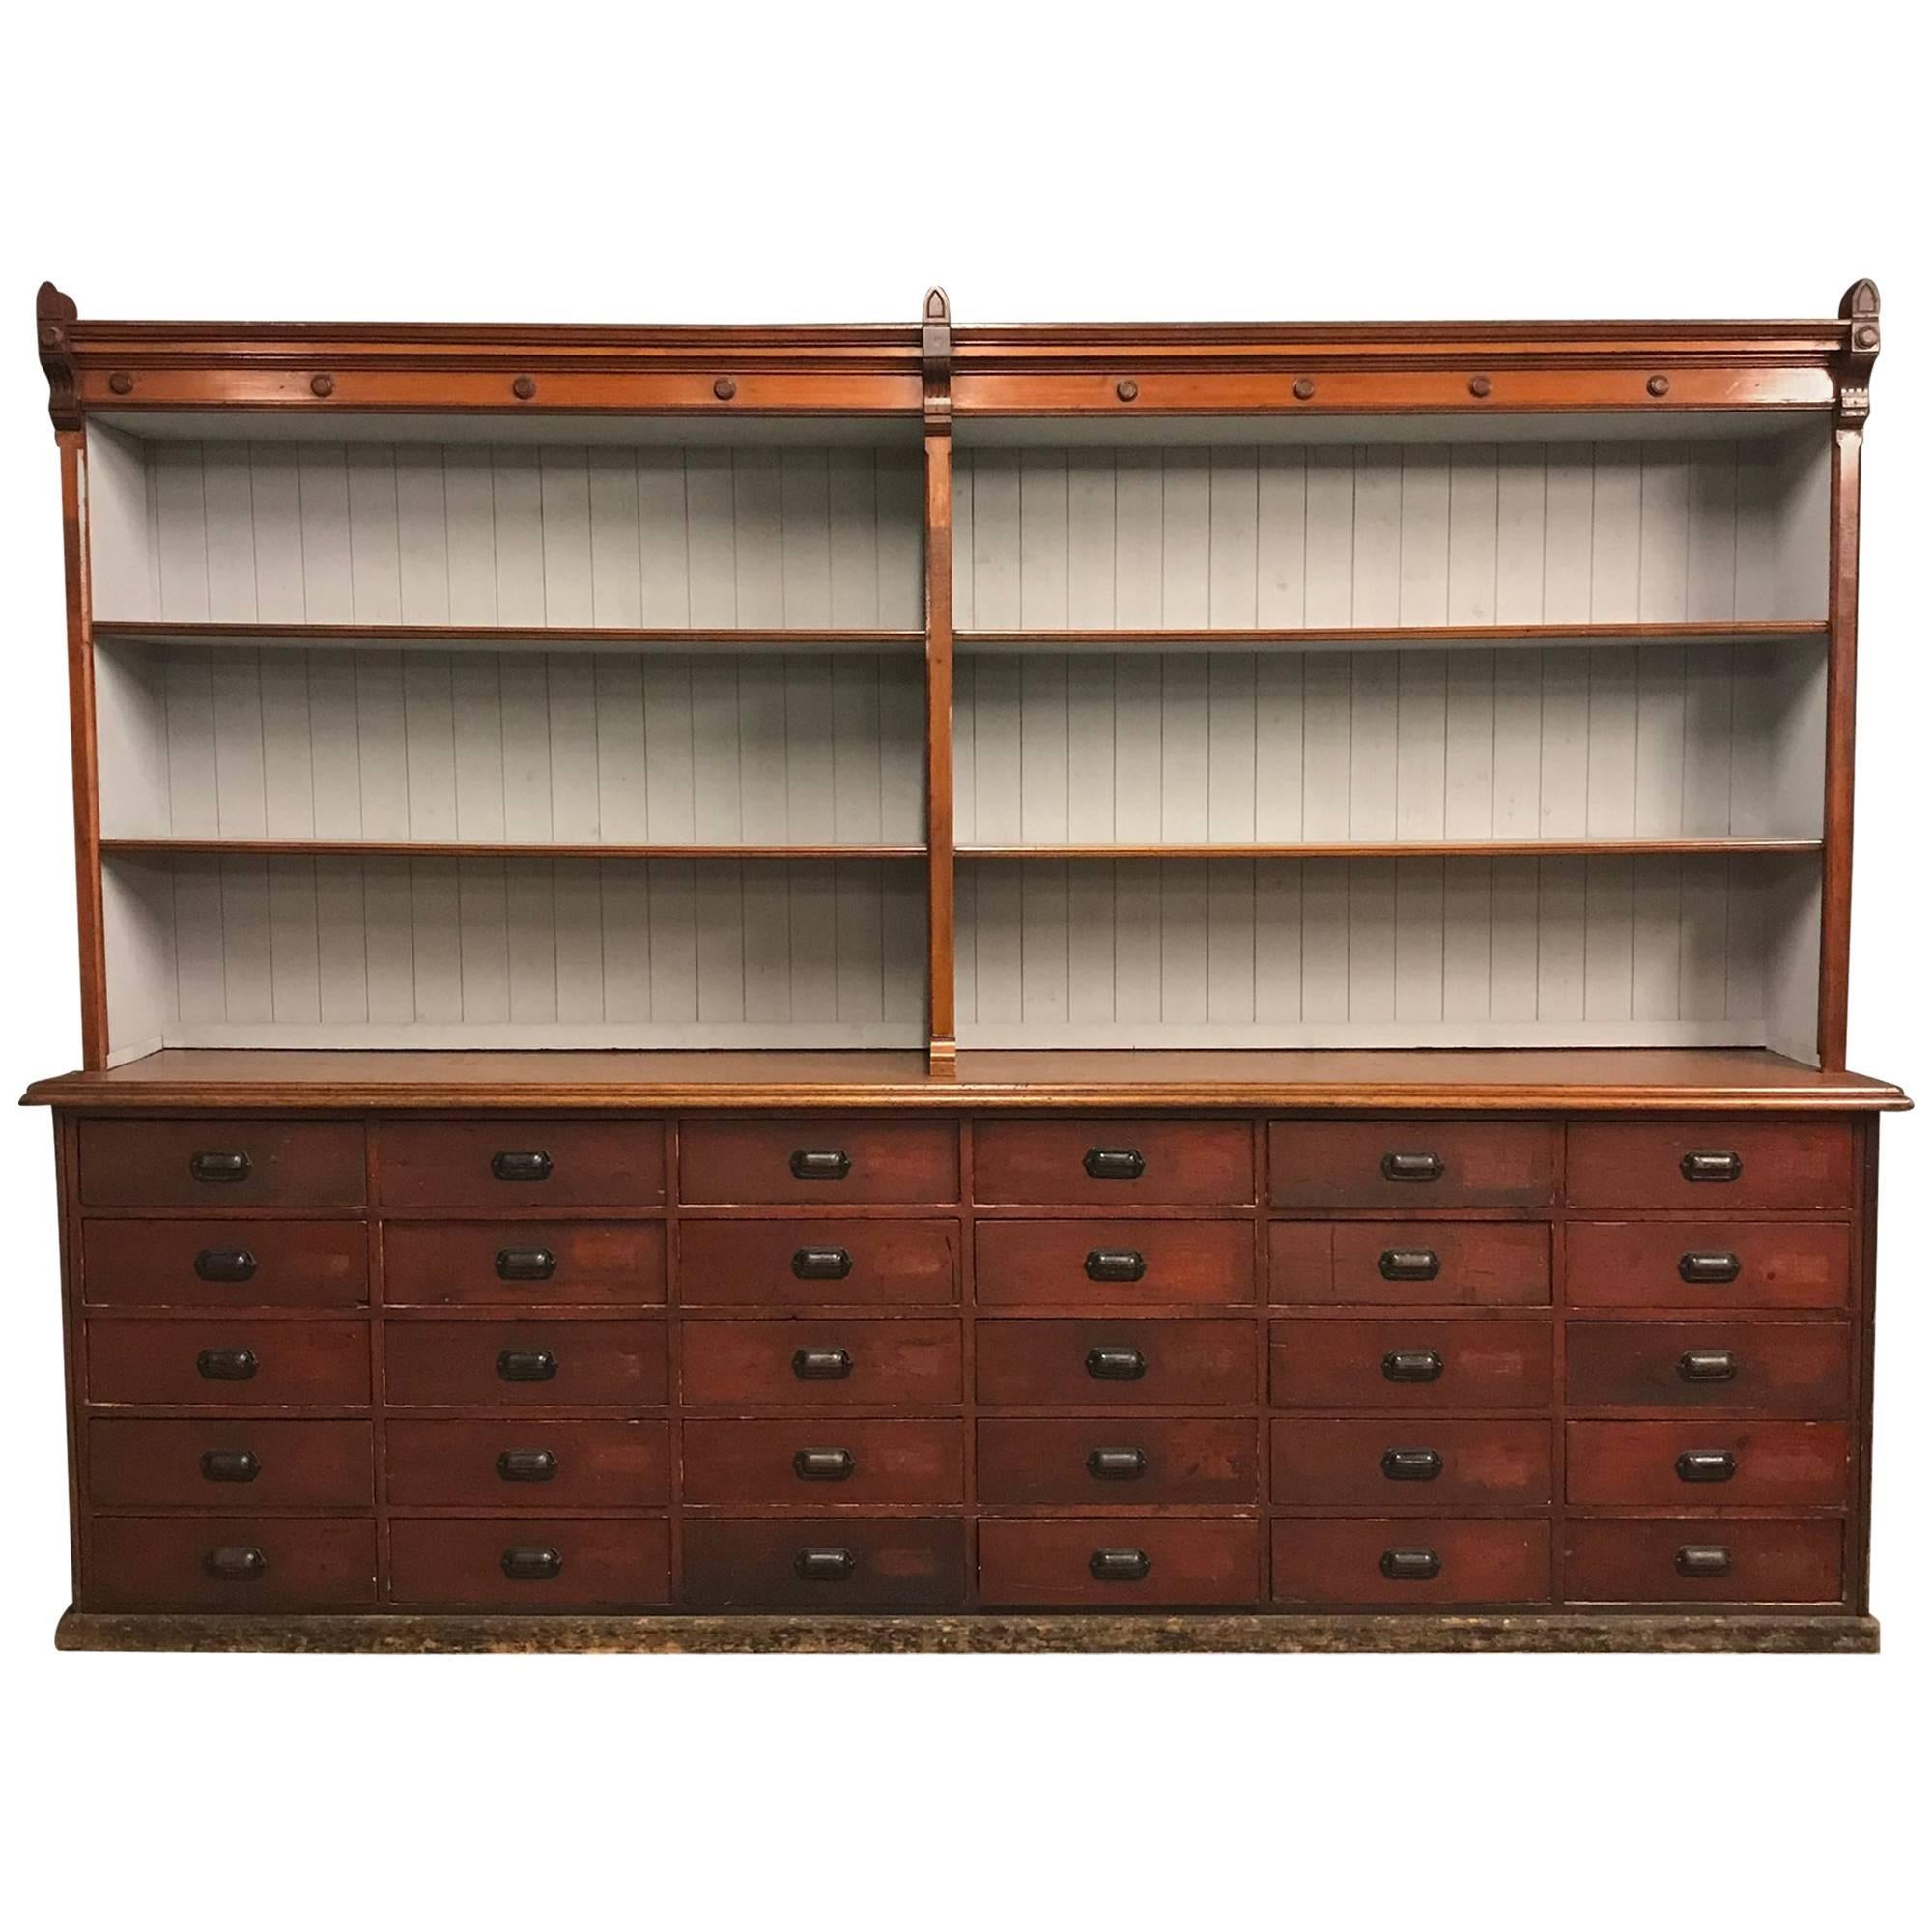 French Antique Kitchen Cabinet with Bank of Drawers For Sale